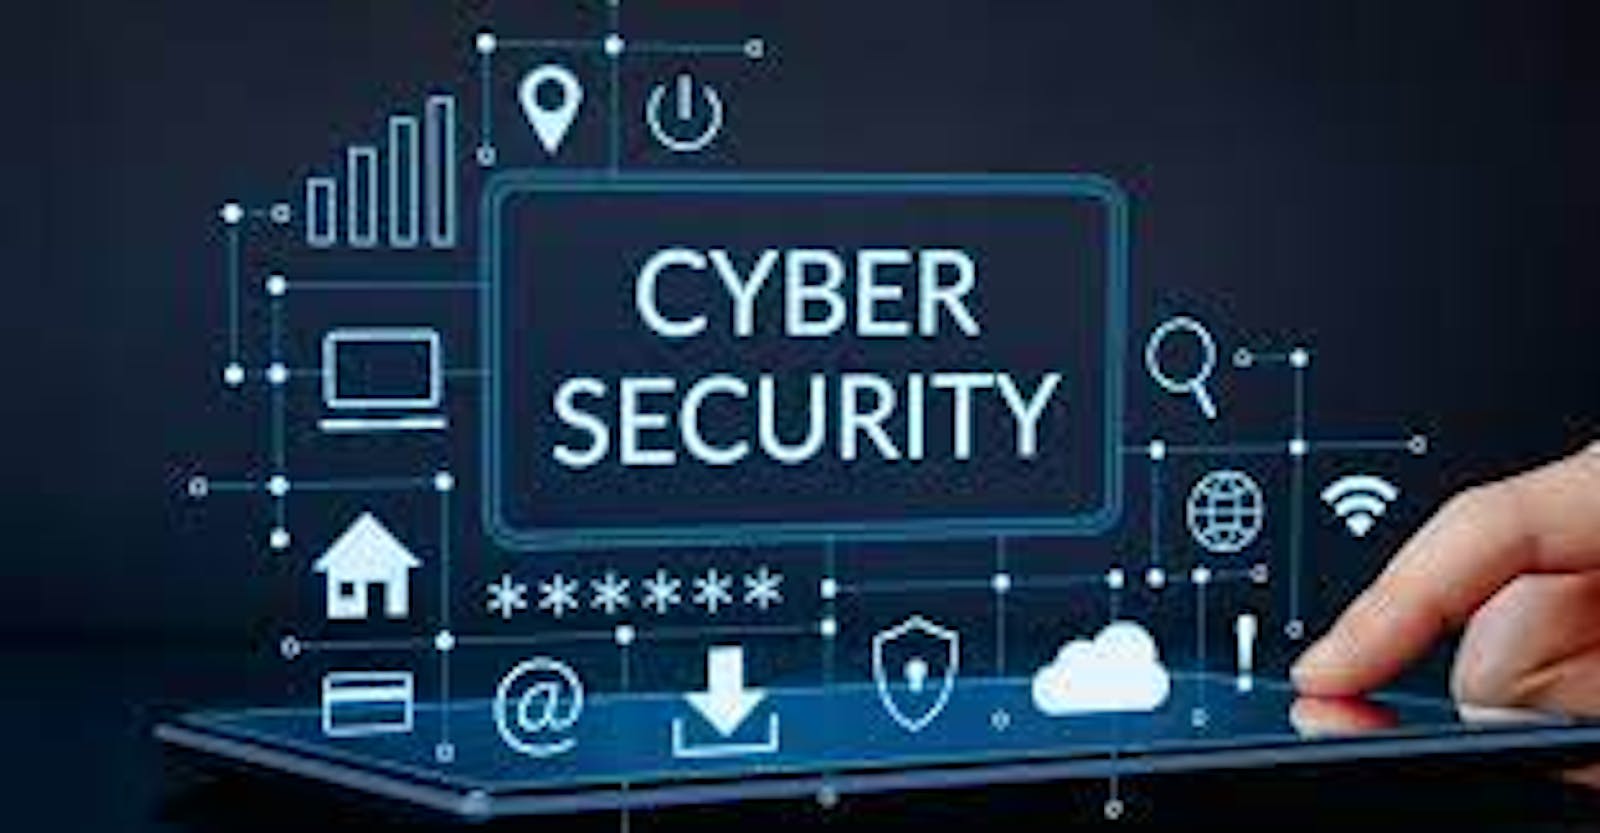 Basic concepts of cybersecurity